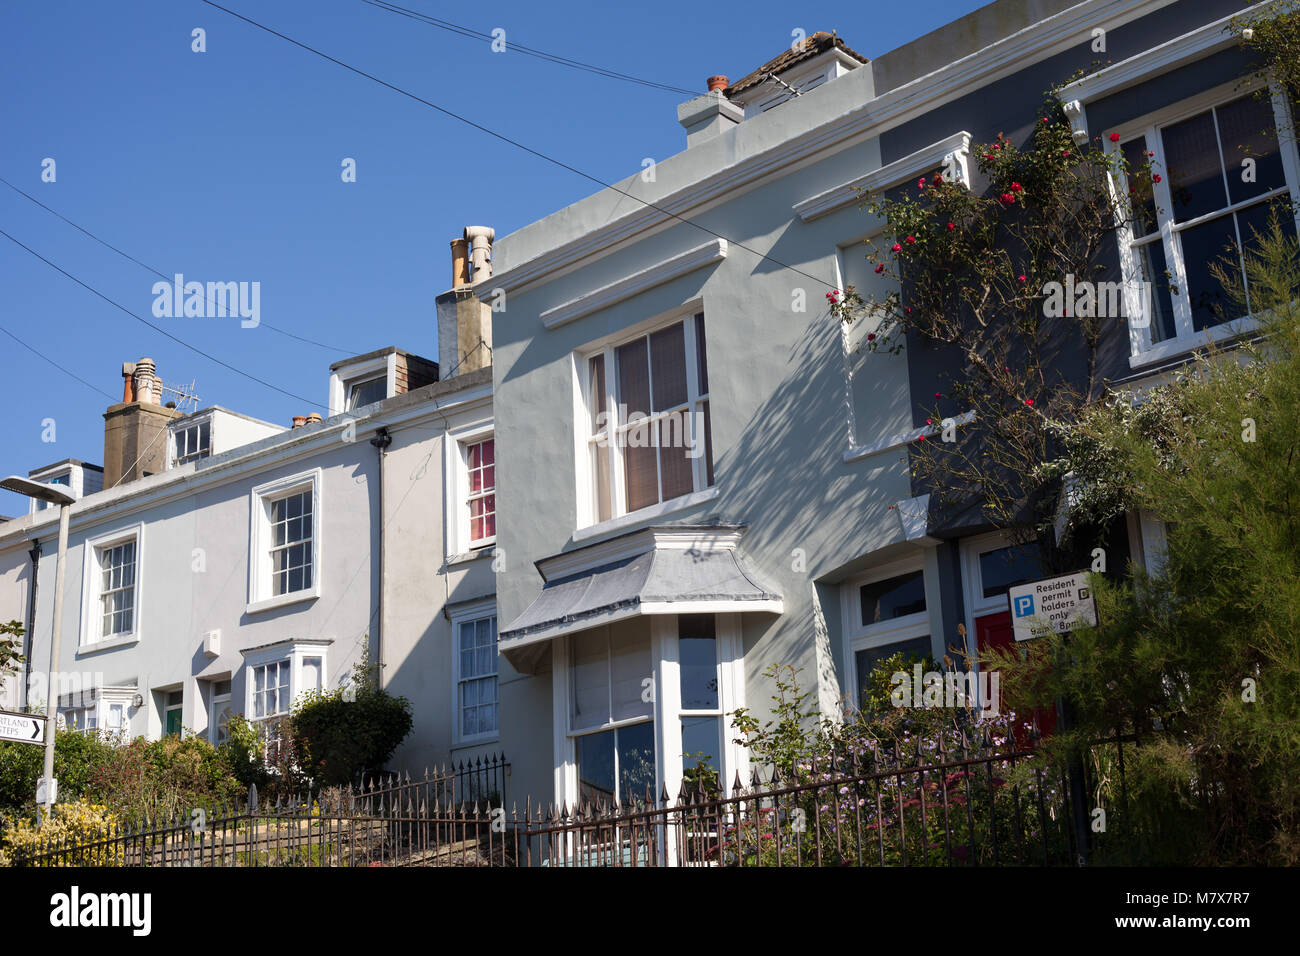 Typical mid 19th century terraced houses, Portland Terrace, Hastings, East Sussex, UK Stock Photo